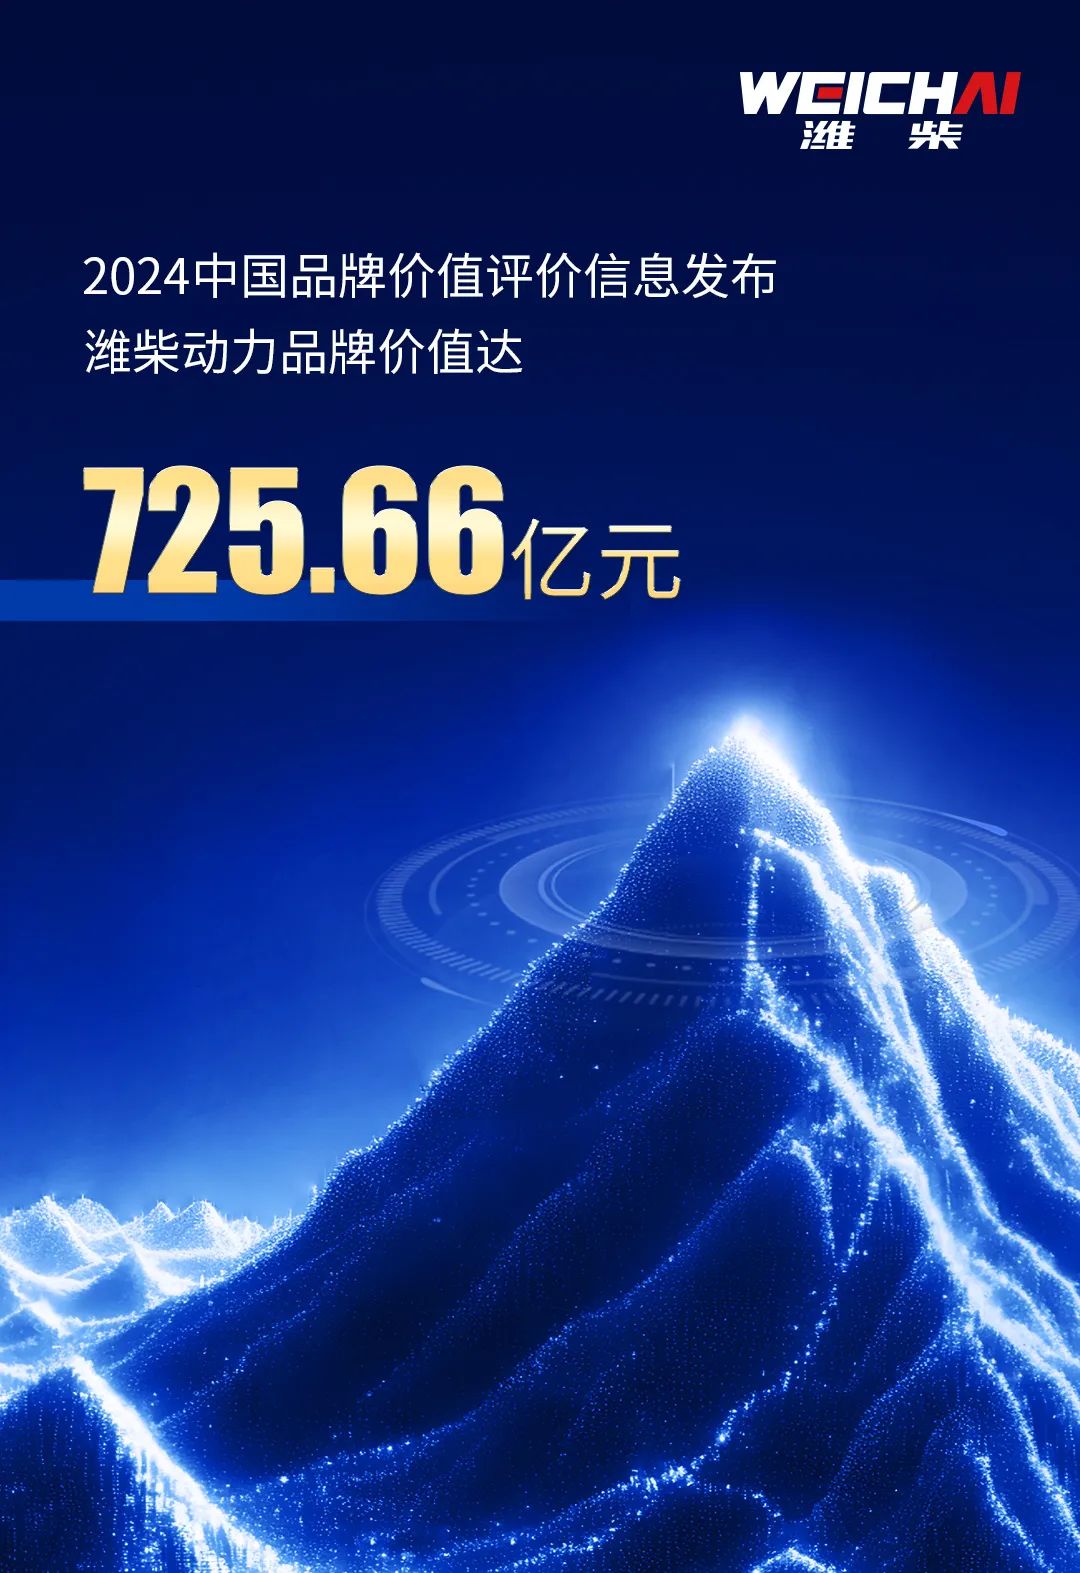 72.566 billion yuan! Weichai Power brand strength ranks first in the field of machinery and equipment manufacturing